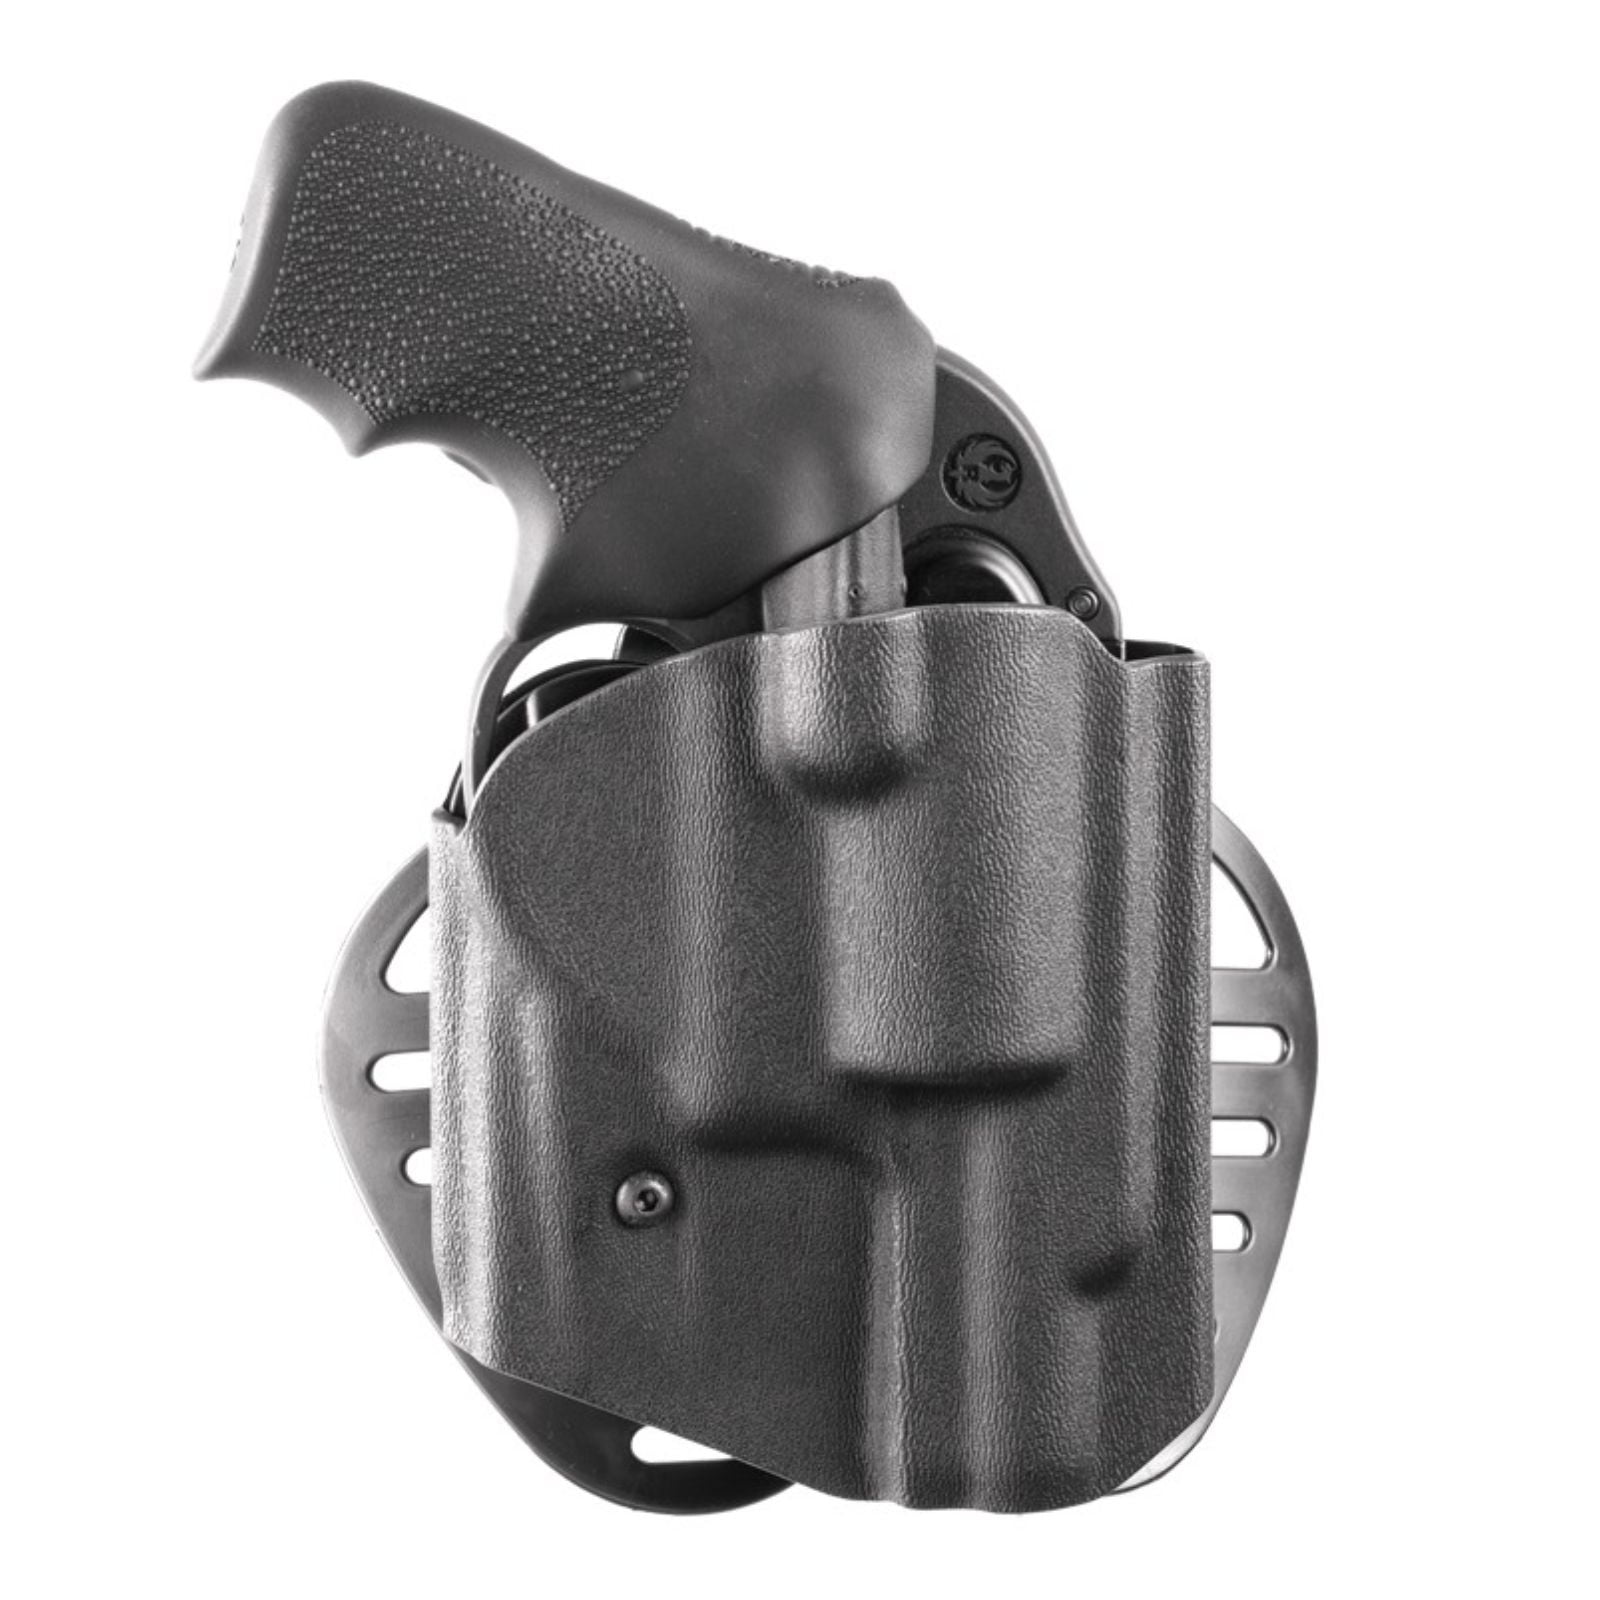 Hunting Gun Holster For BR-2 Paddle Holsters Handgun Holster Pouch 